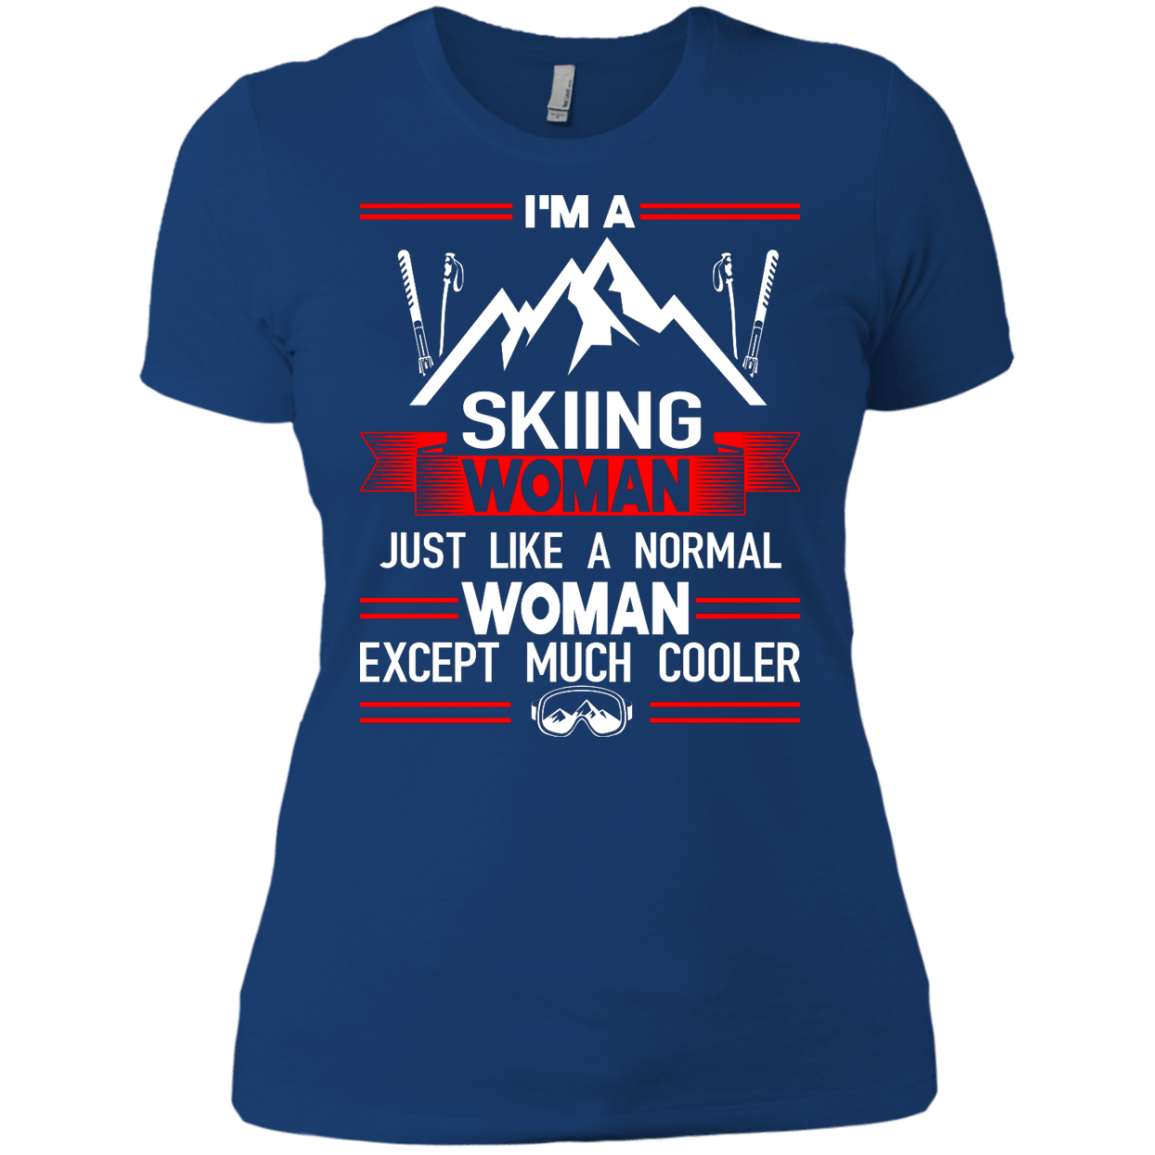 I'm A Skiing Woman Except Much Cooler Tank Tops